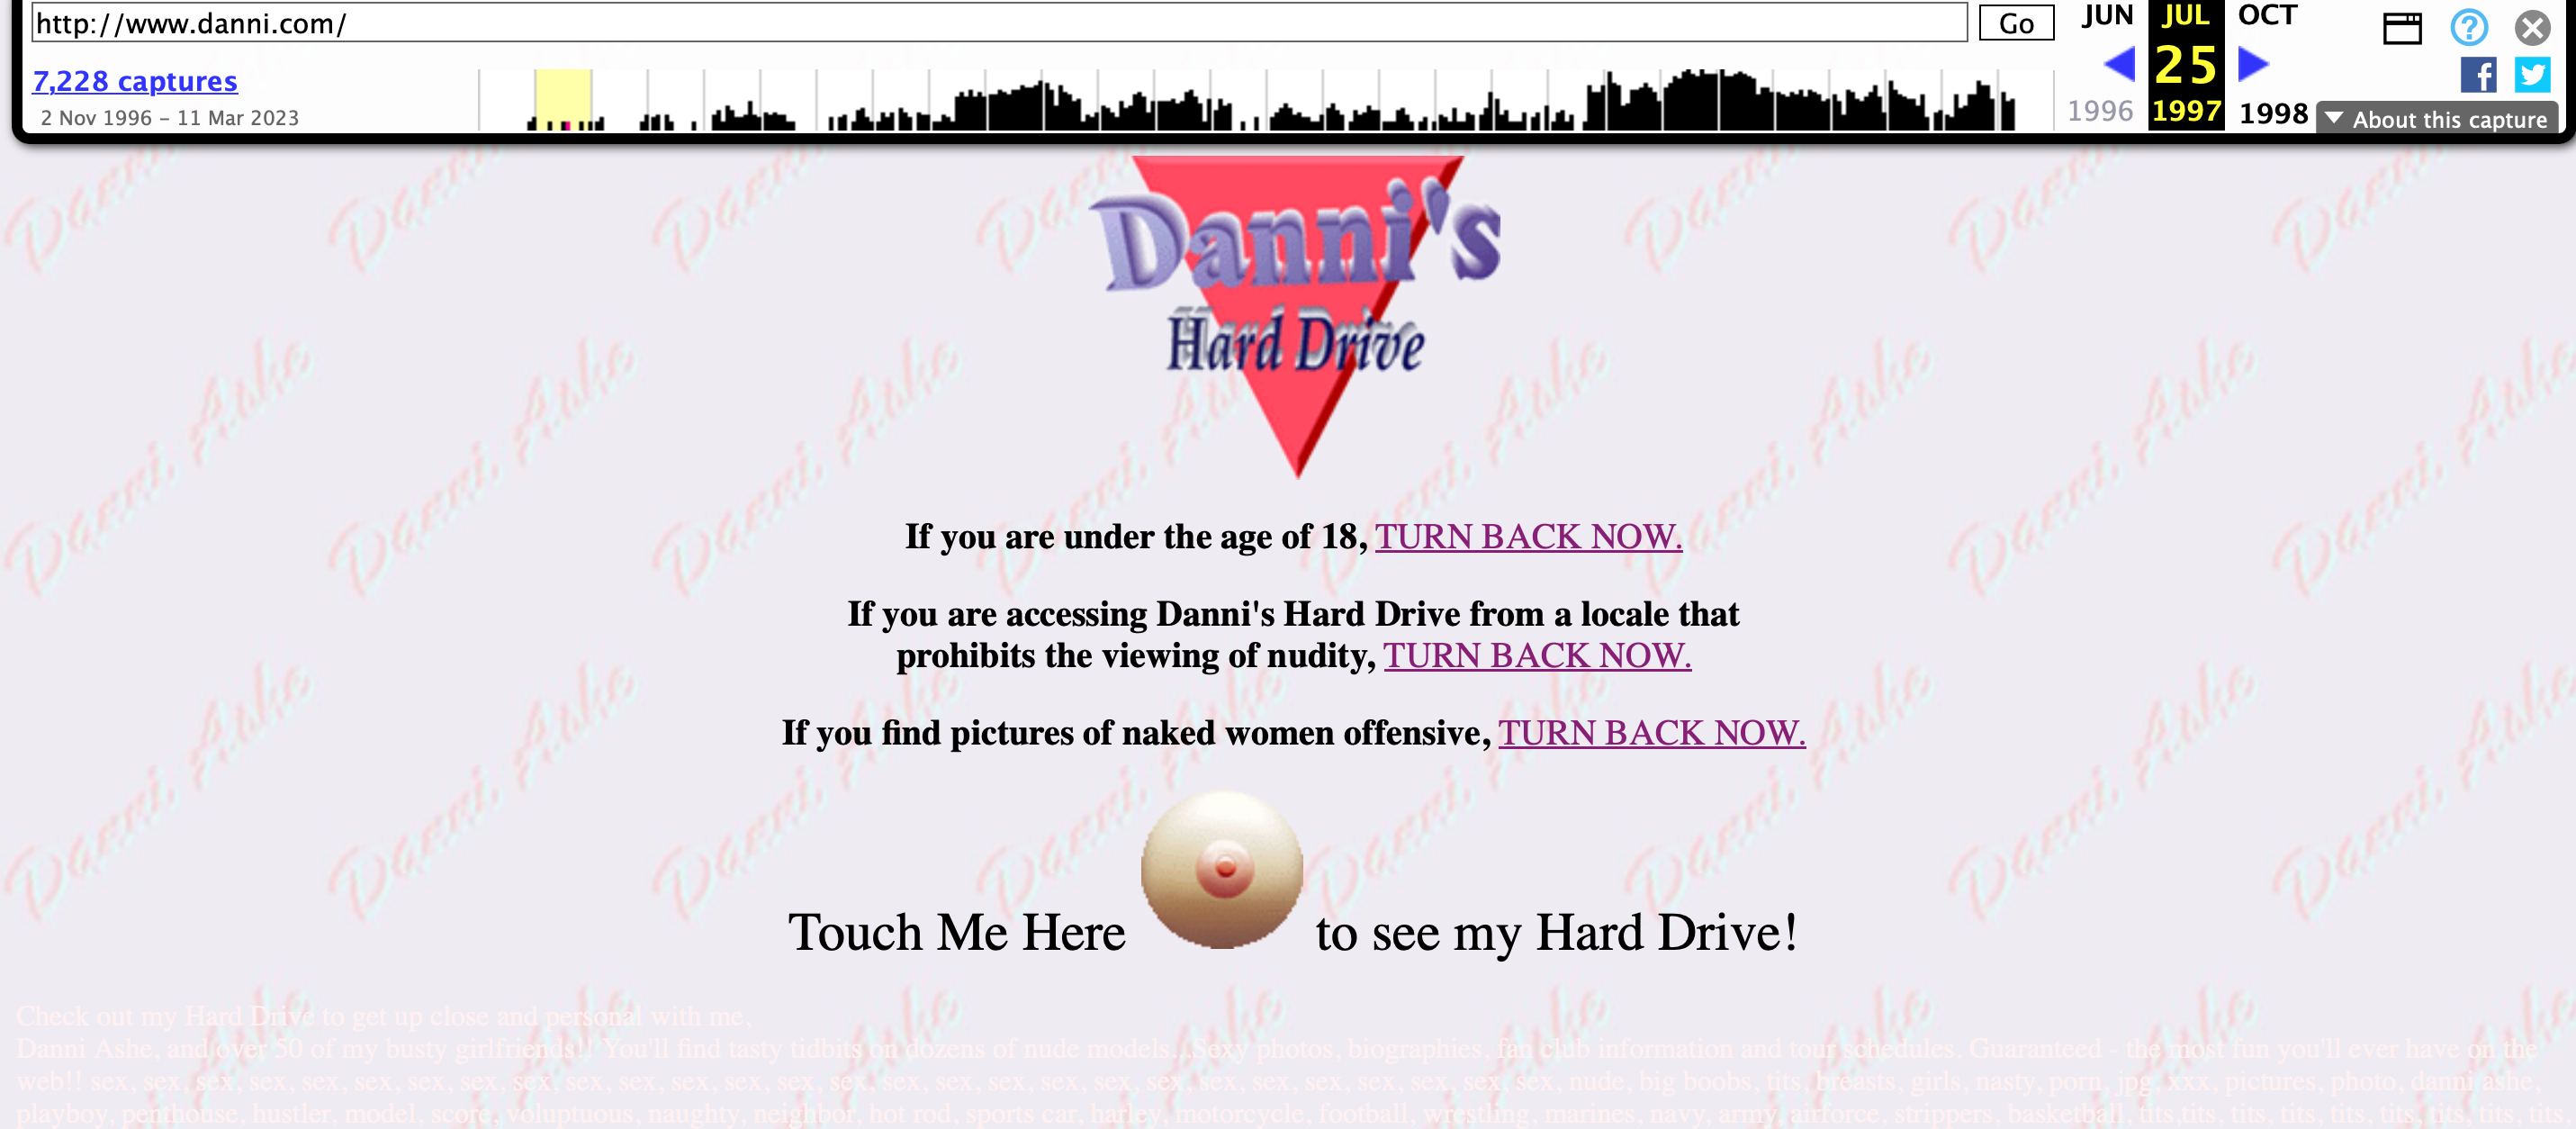 A disclaimer page for Danni's Hard Drive displaying a warning for explicit material proceeding.